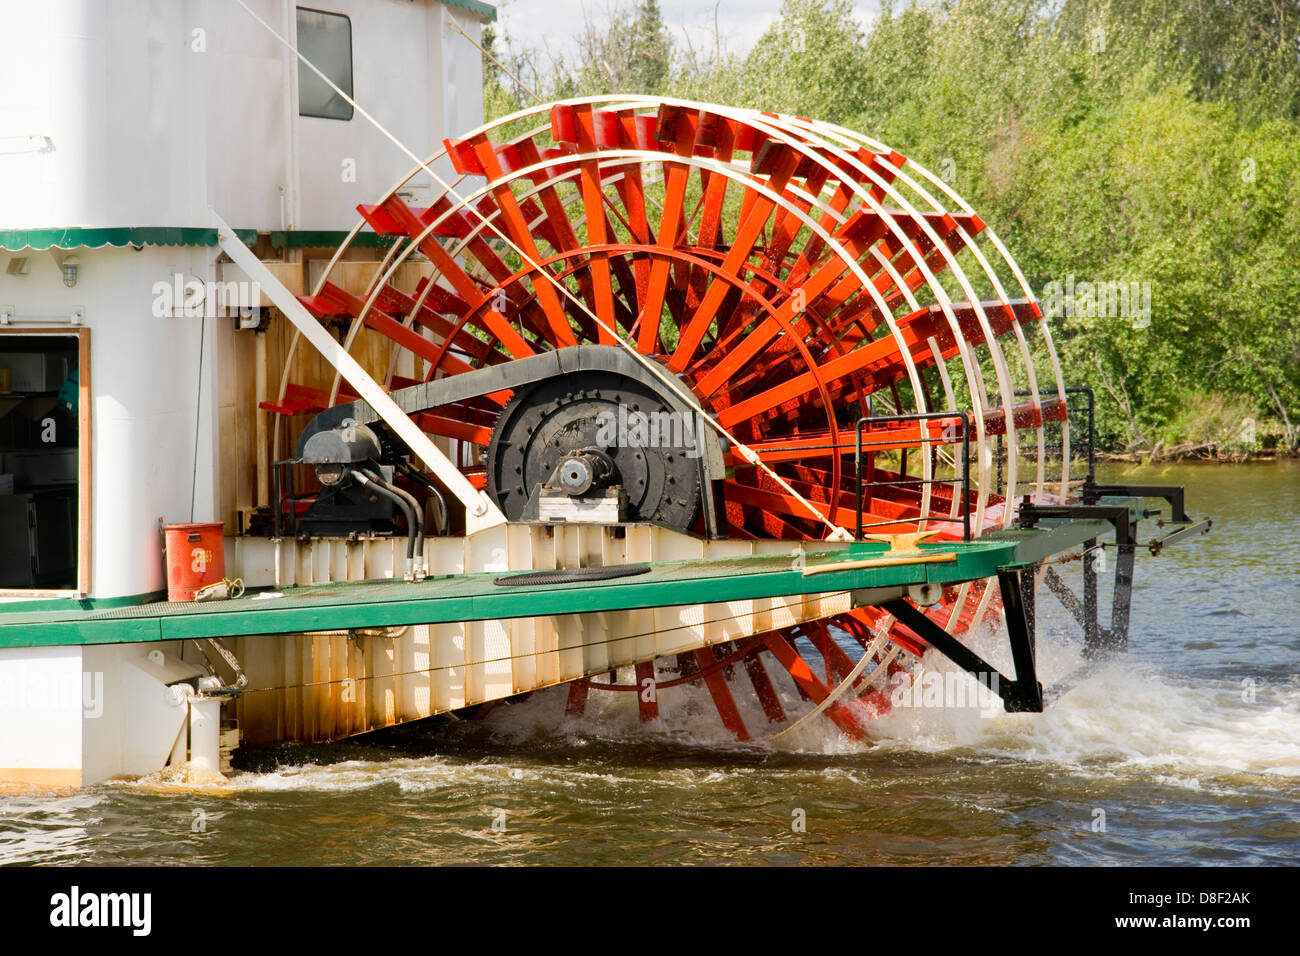 A paddle wheel is seen here on sternwheeler vessel Stock Photo